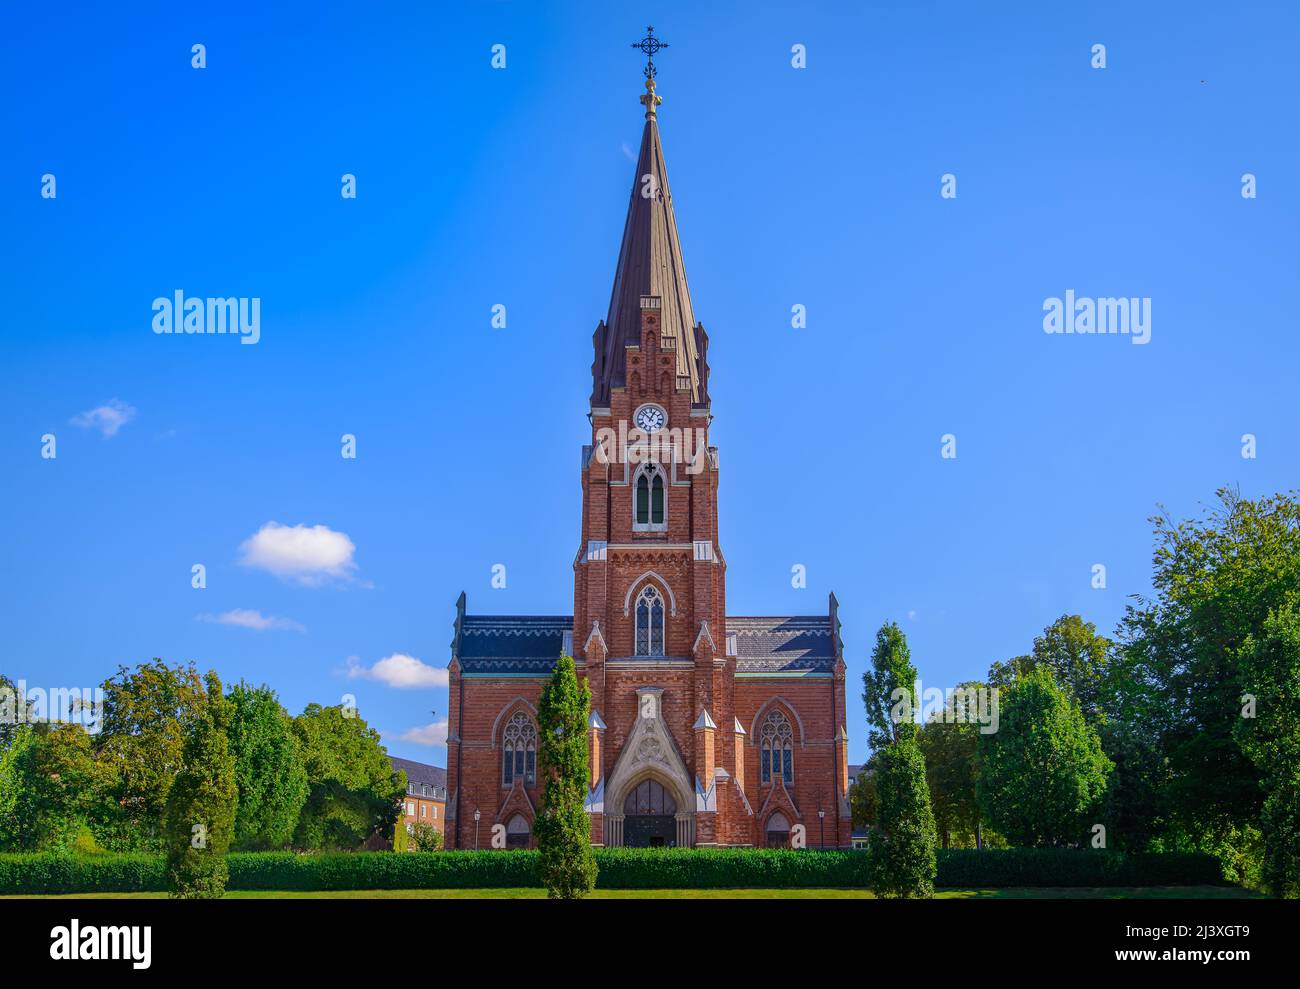 View to 'All Saints Church' inaugurated in 1891 in Lund, Sweden. The church is built in a Neo-Gothic style and has 72-meter-high tower. Stock Photo